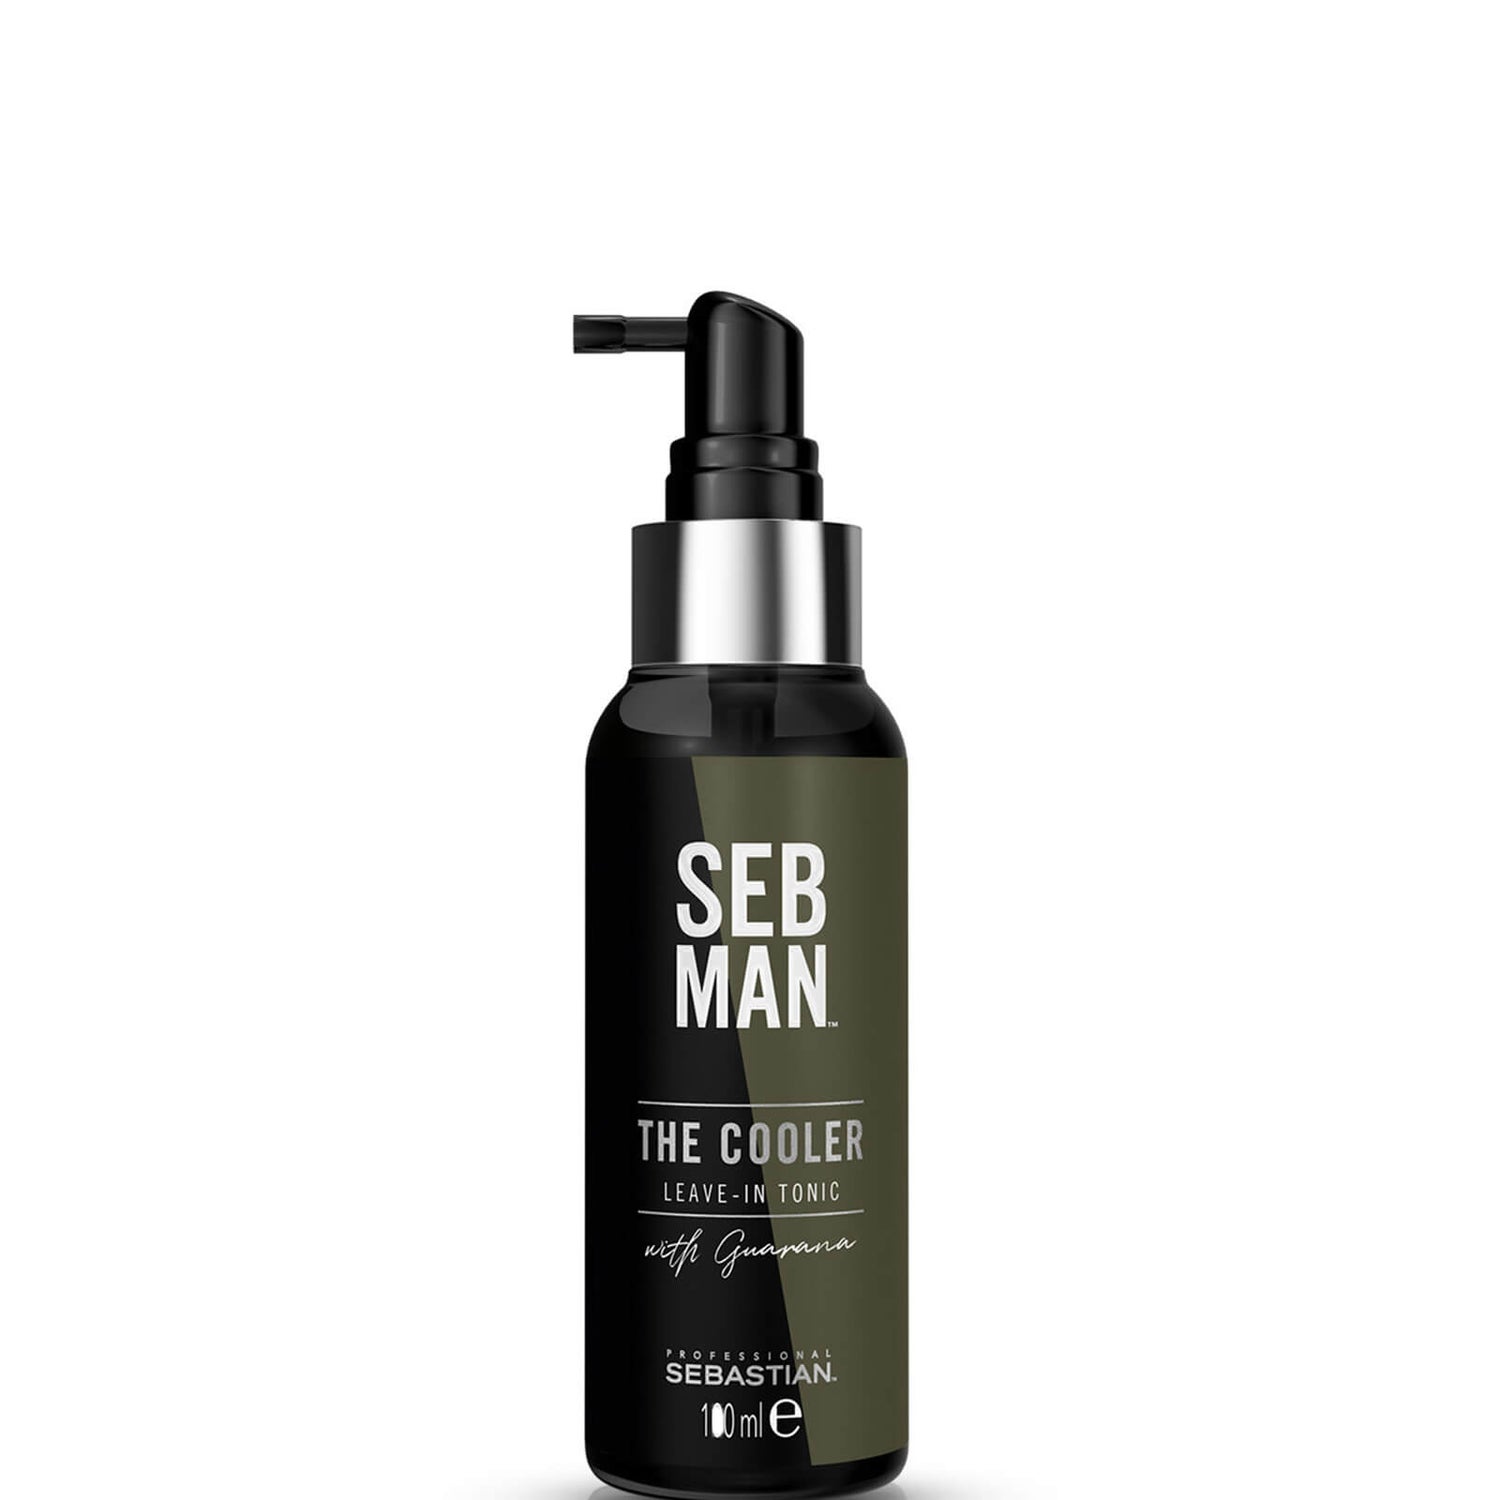 Seb Man The Cooler Refreshing Leave-in Tonic 100ml